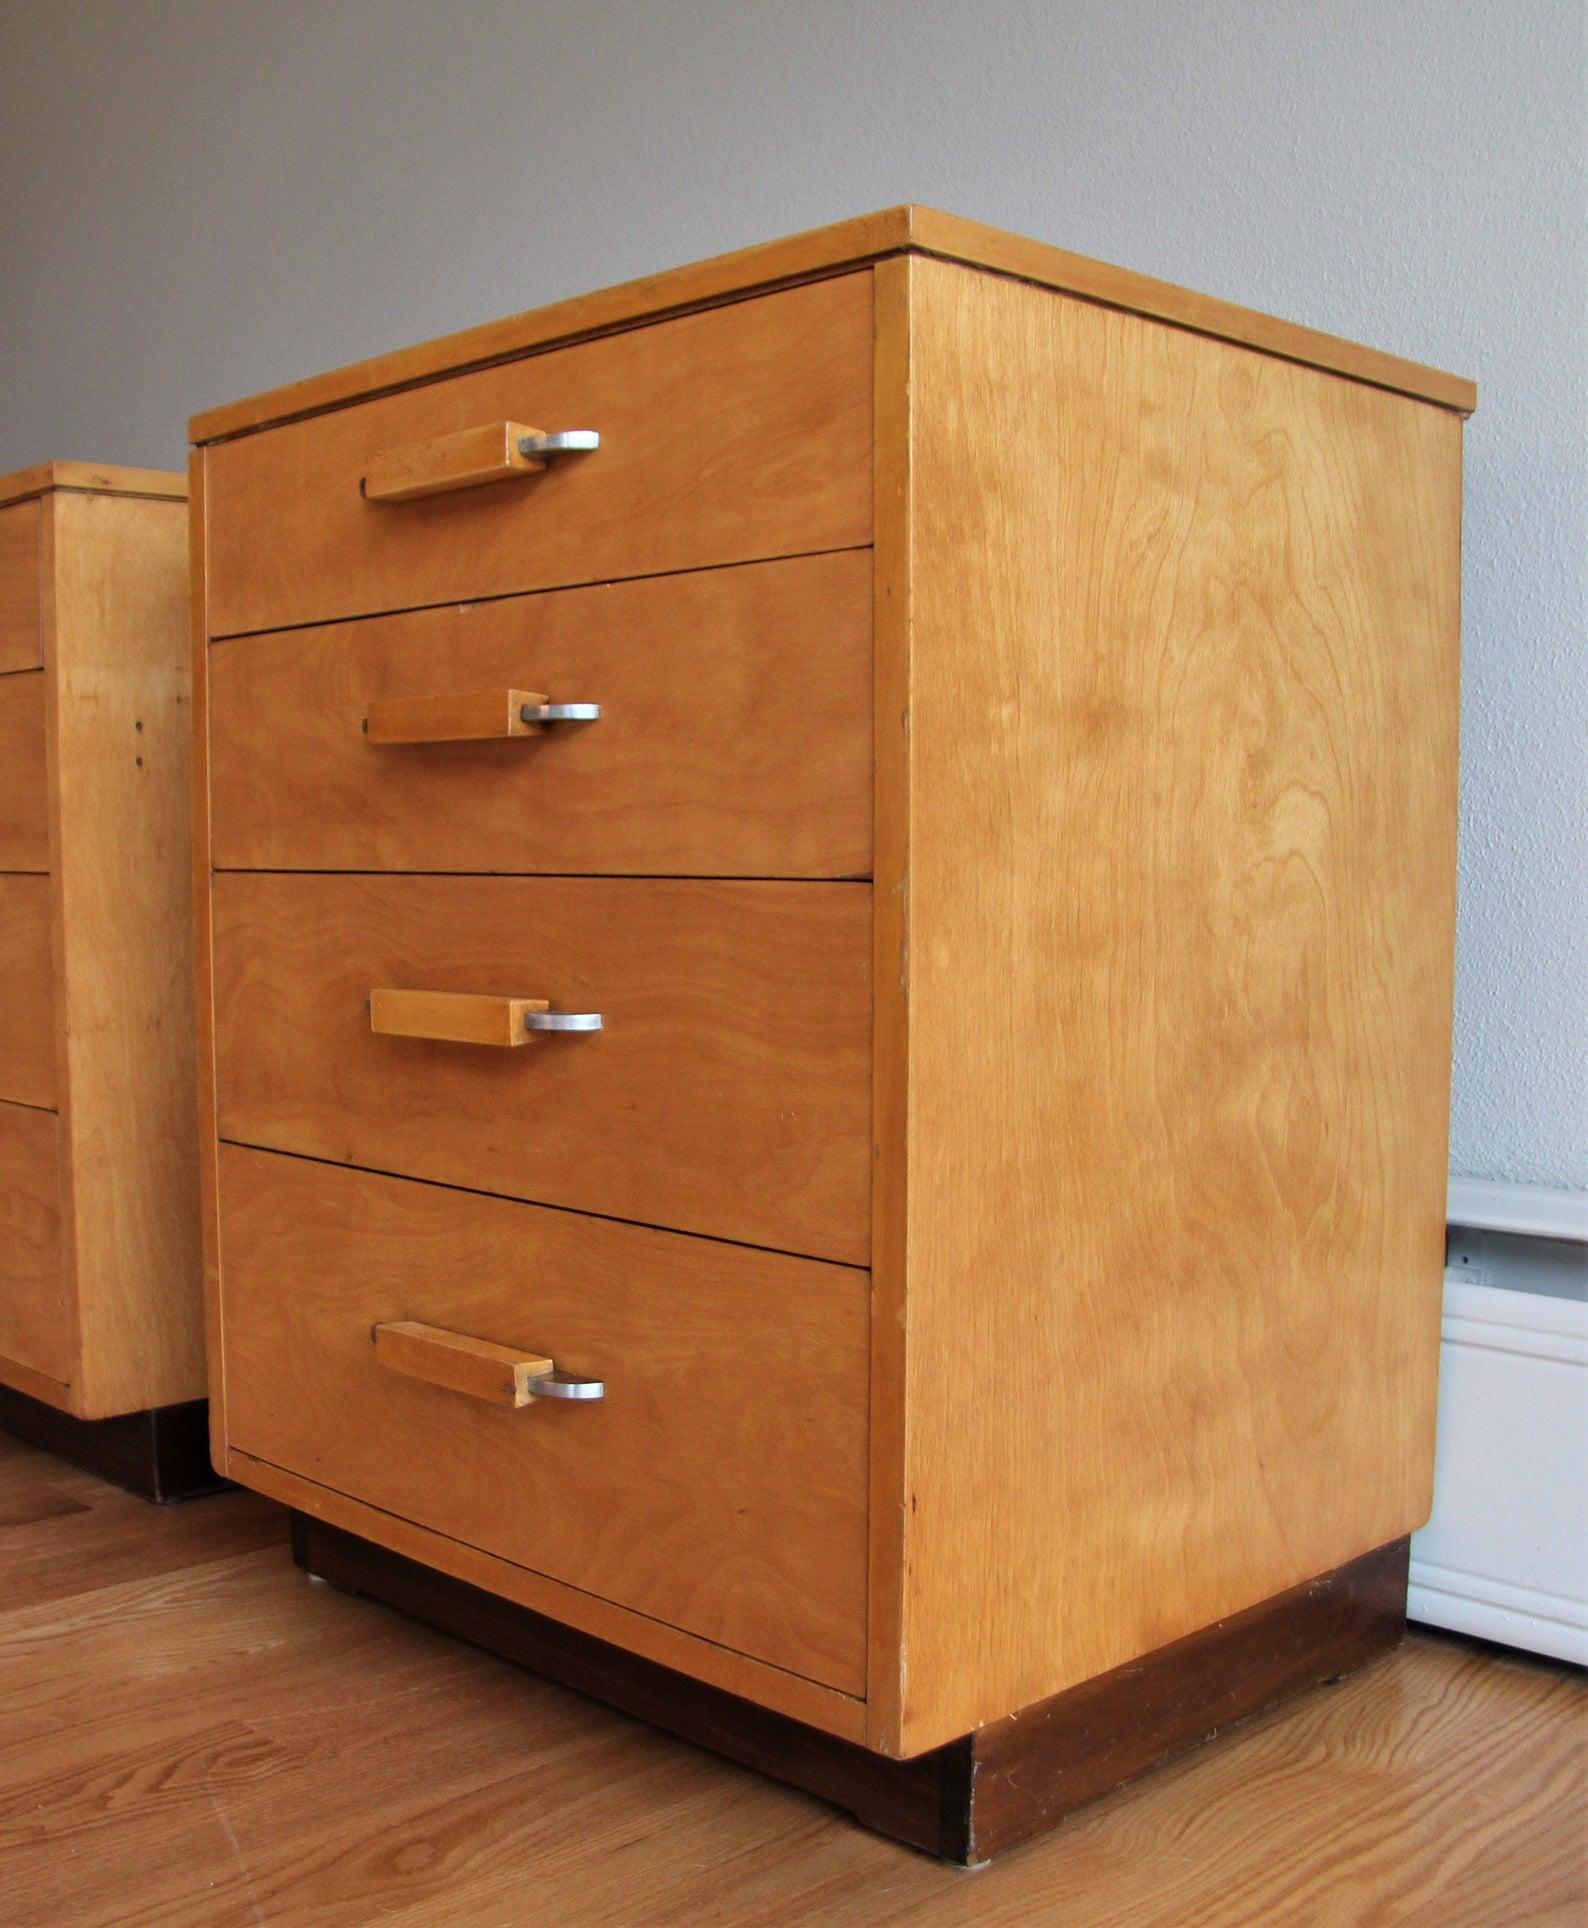 A set (2) of matching nightstands or small chest of drawers by John Stuart for Johnson Furniture. The design is from the FHA (Flexible Home Arrangement) a modular collection by Eliel Saarinen. However, these pieces are by John Stuart, perhaps in